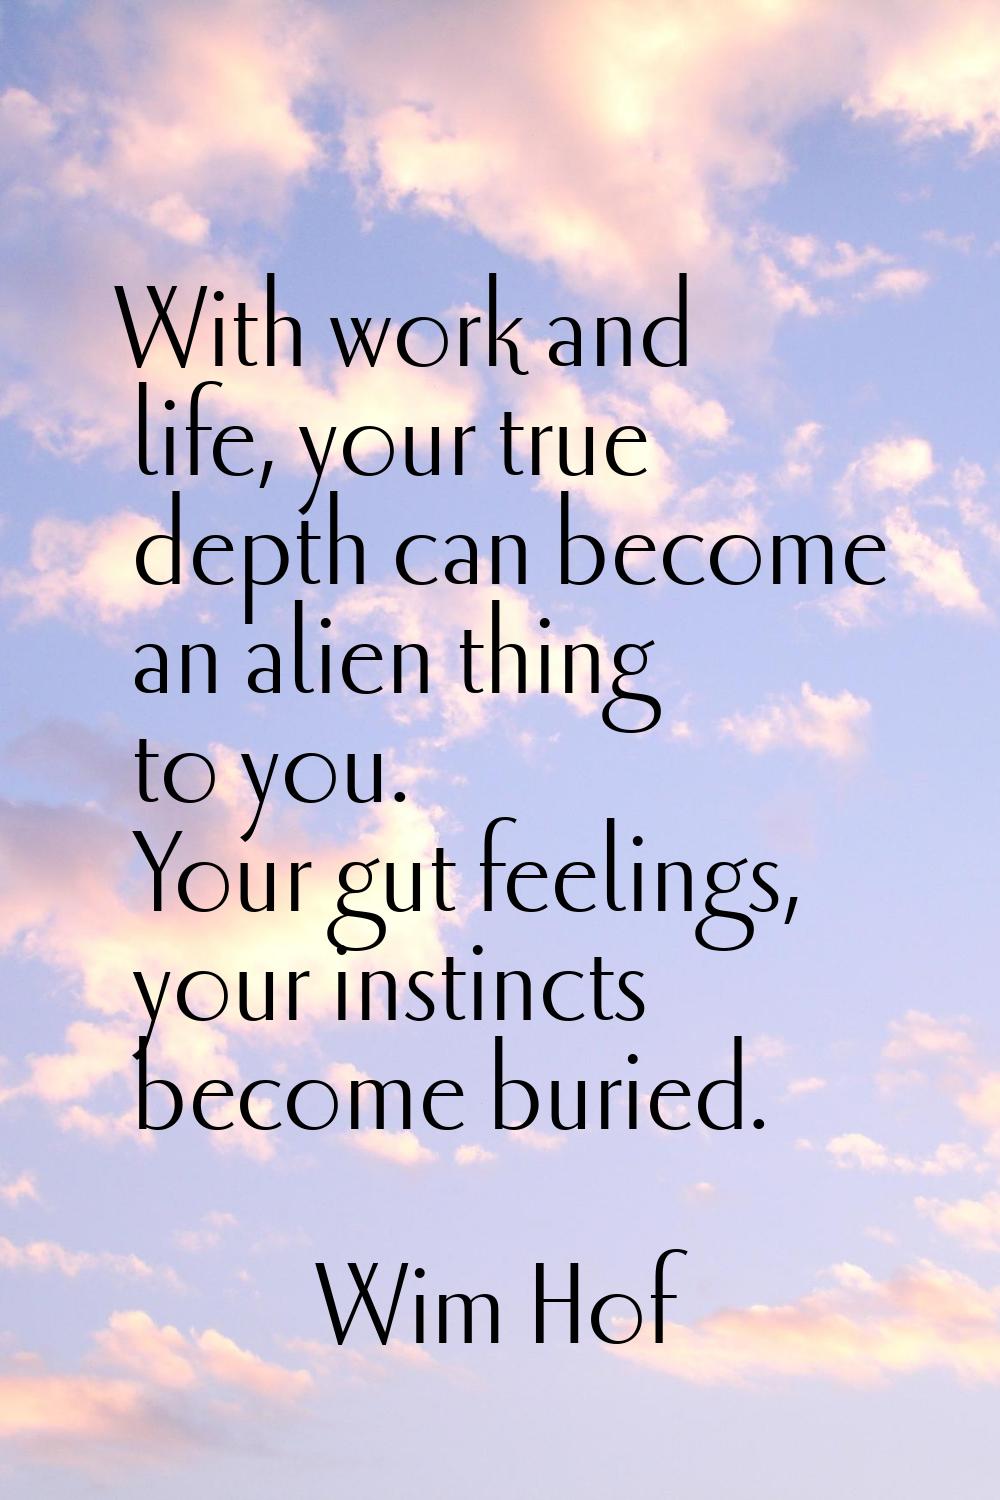 With work and life, your true depth can become an alien thing to you. Your gut feelings, your insti